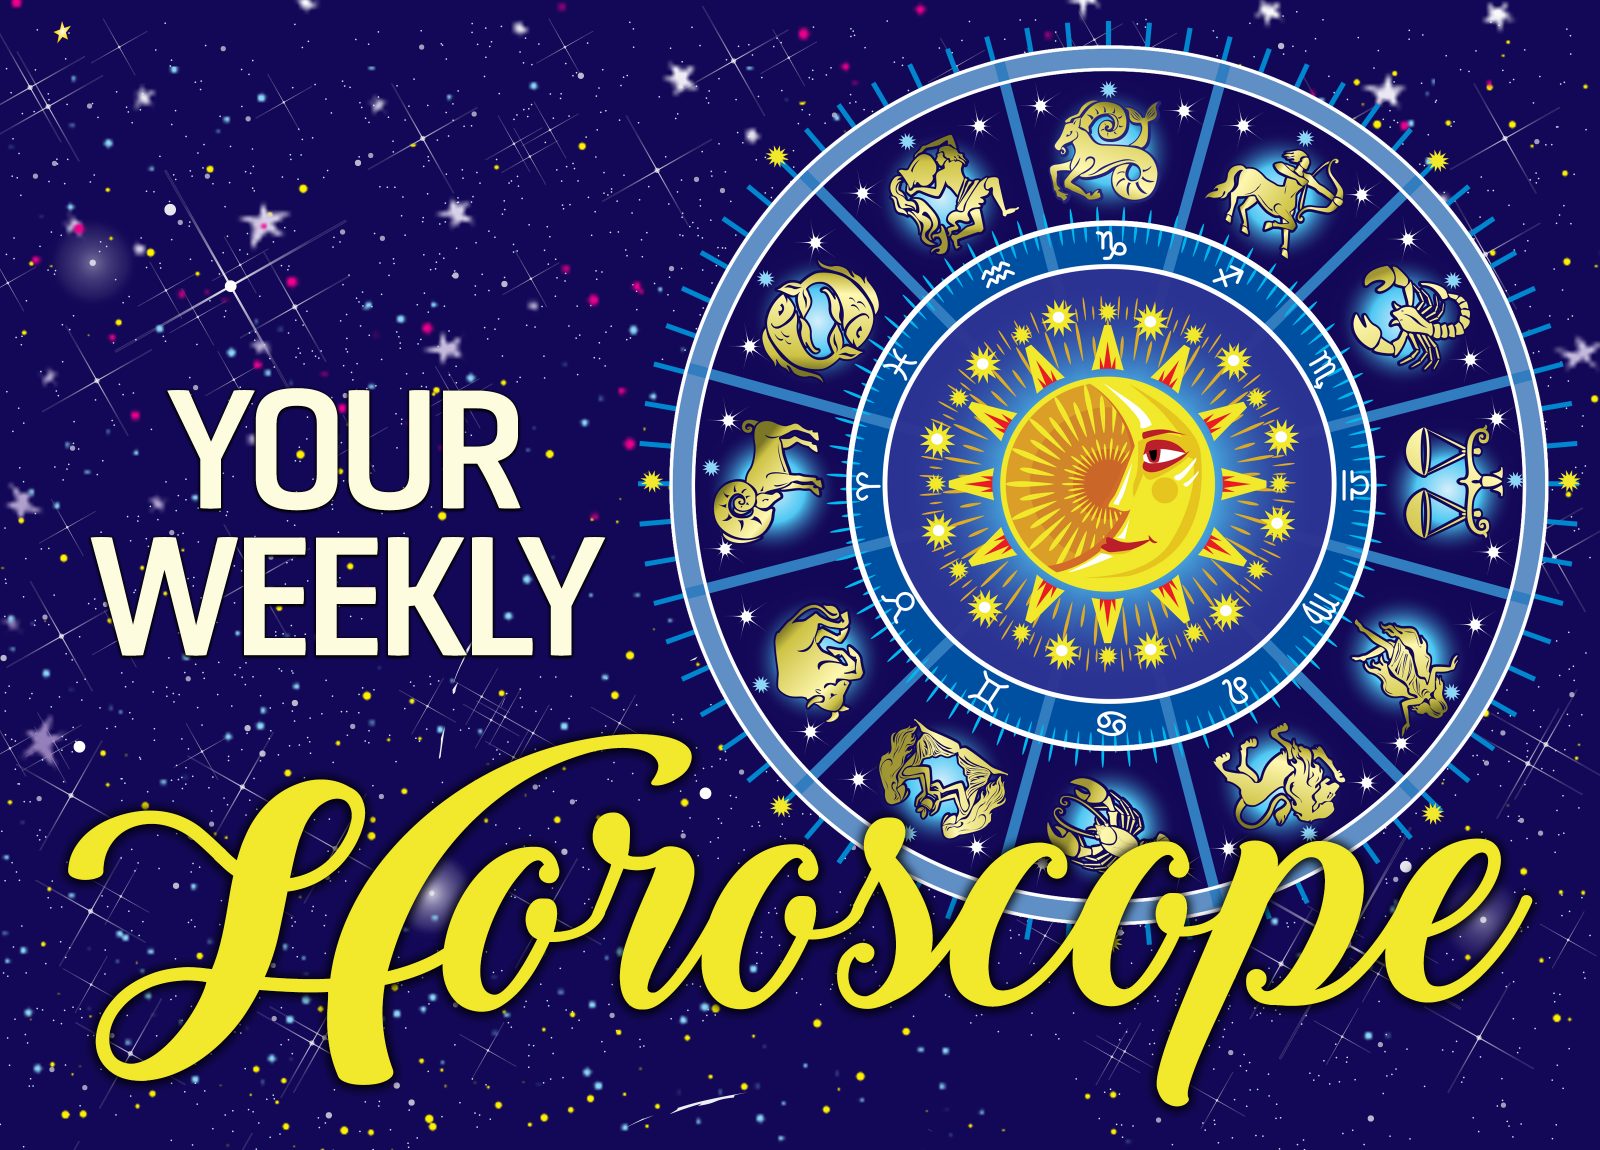 YOUR WEEKLY HOROSCOPE